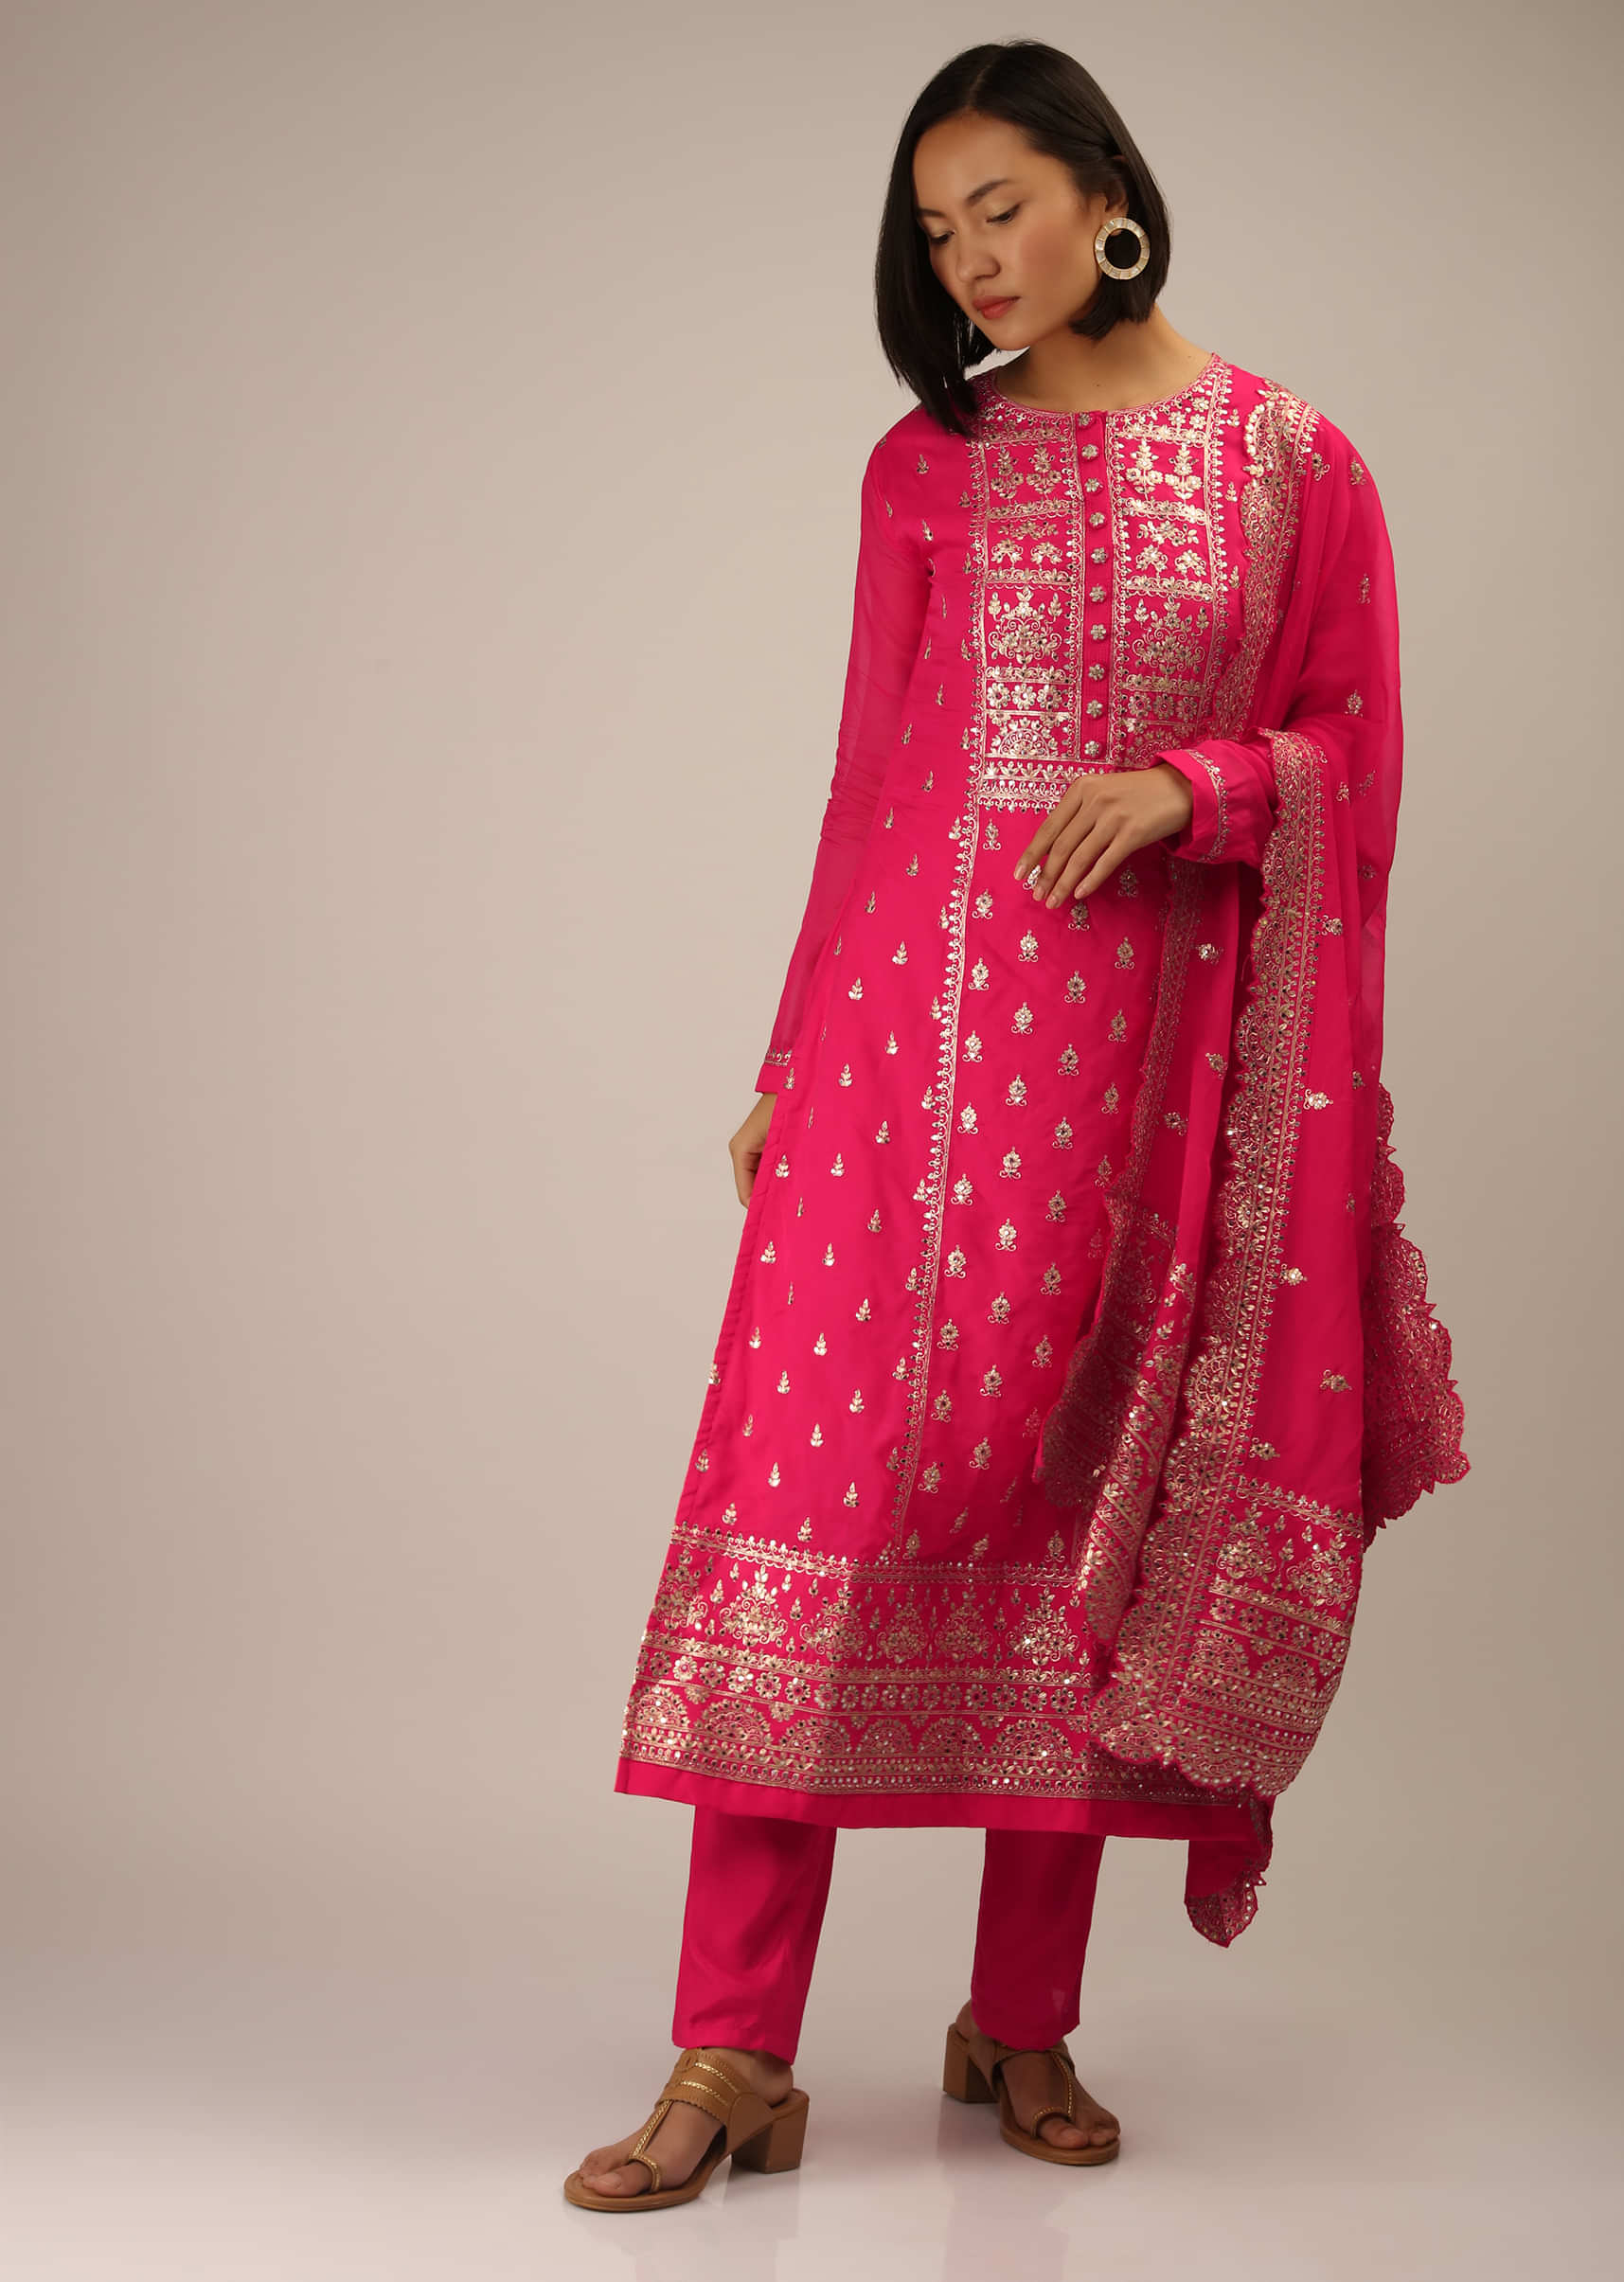 Hot Pink Straight Cut Suit In Organza Silk With Zari And Mirror Work And Full Sleeves